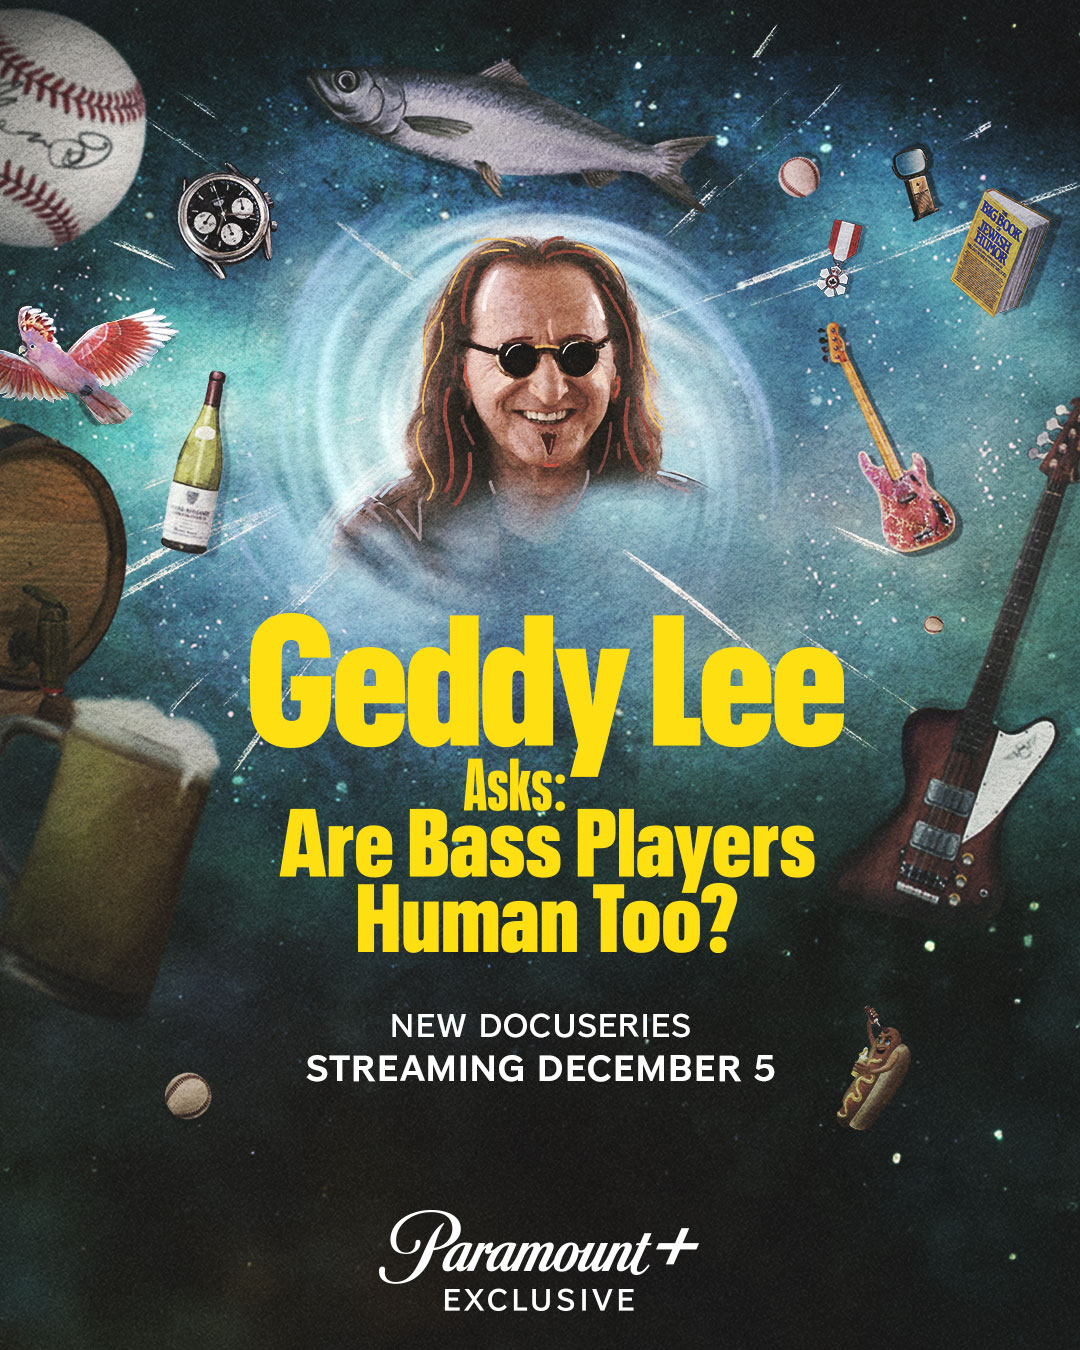 Geddy Lee Ask: Are Bass Players Human Too?